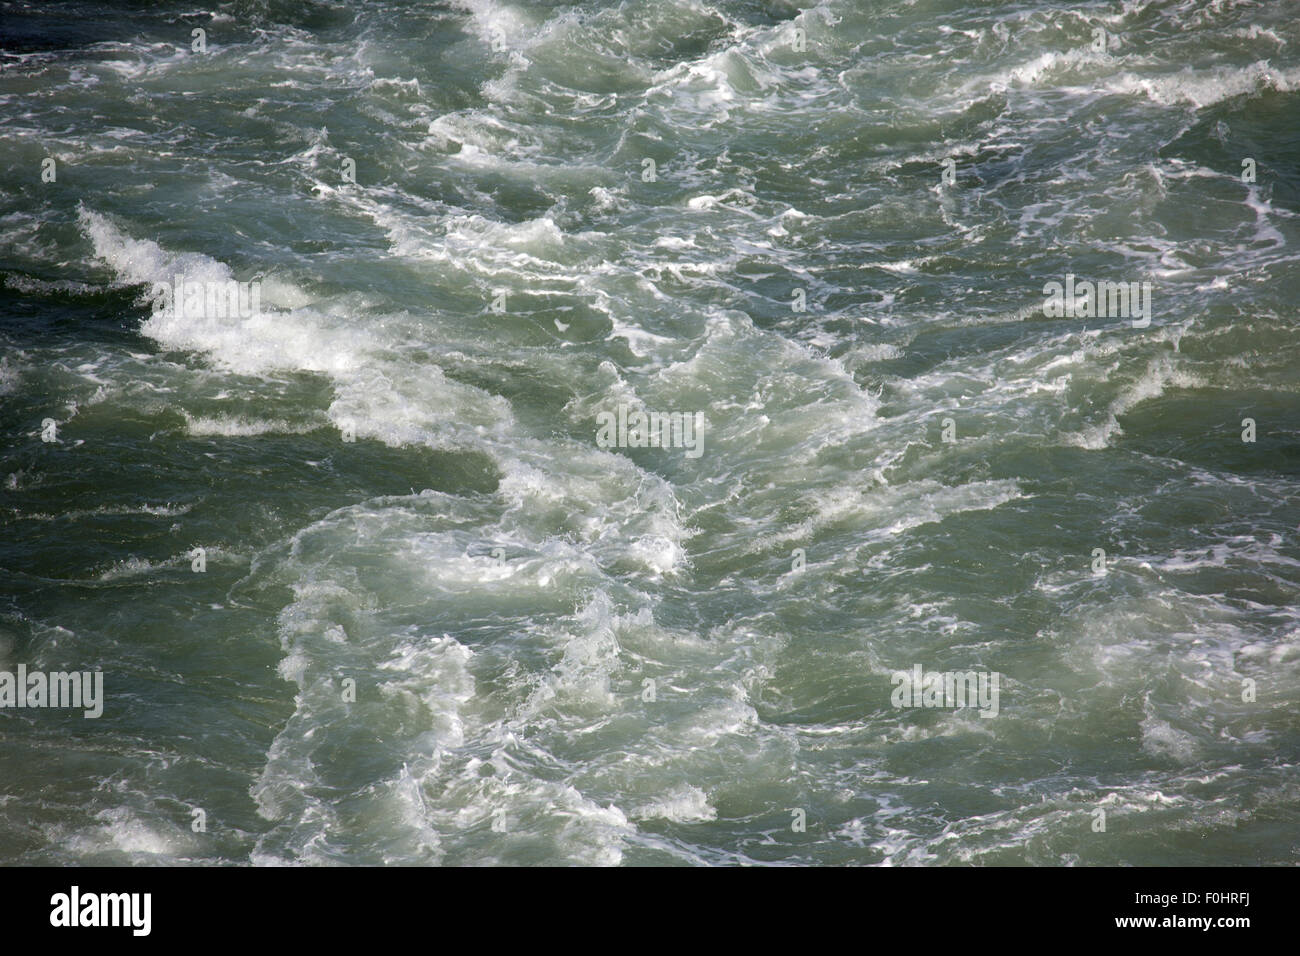 Mare churning. Mare verde con onde churning Foto Stock